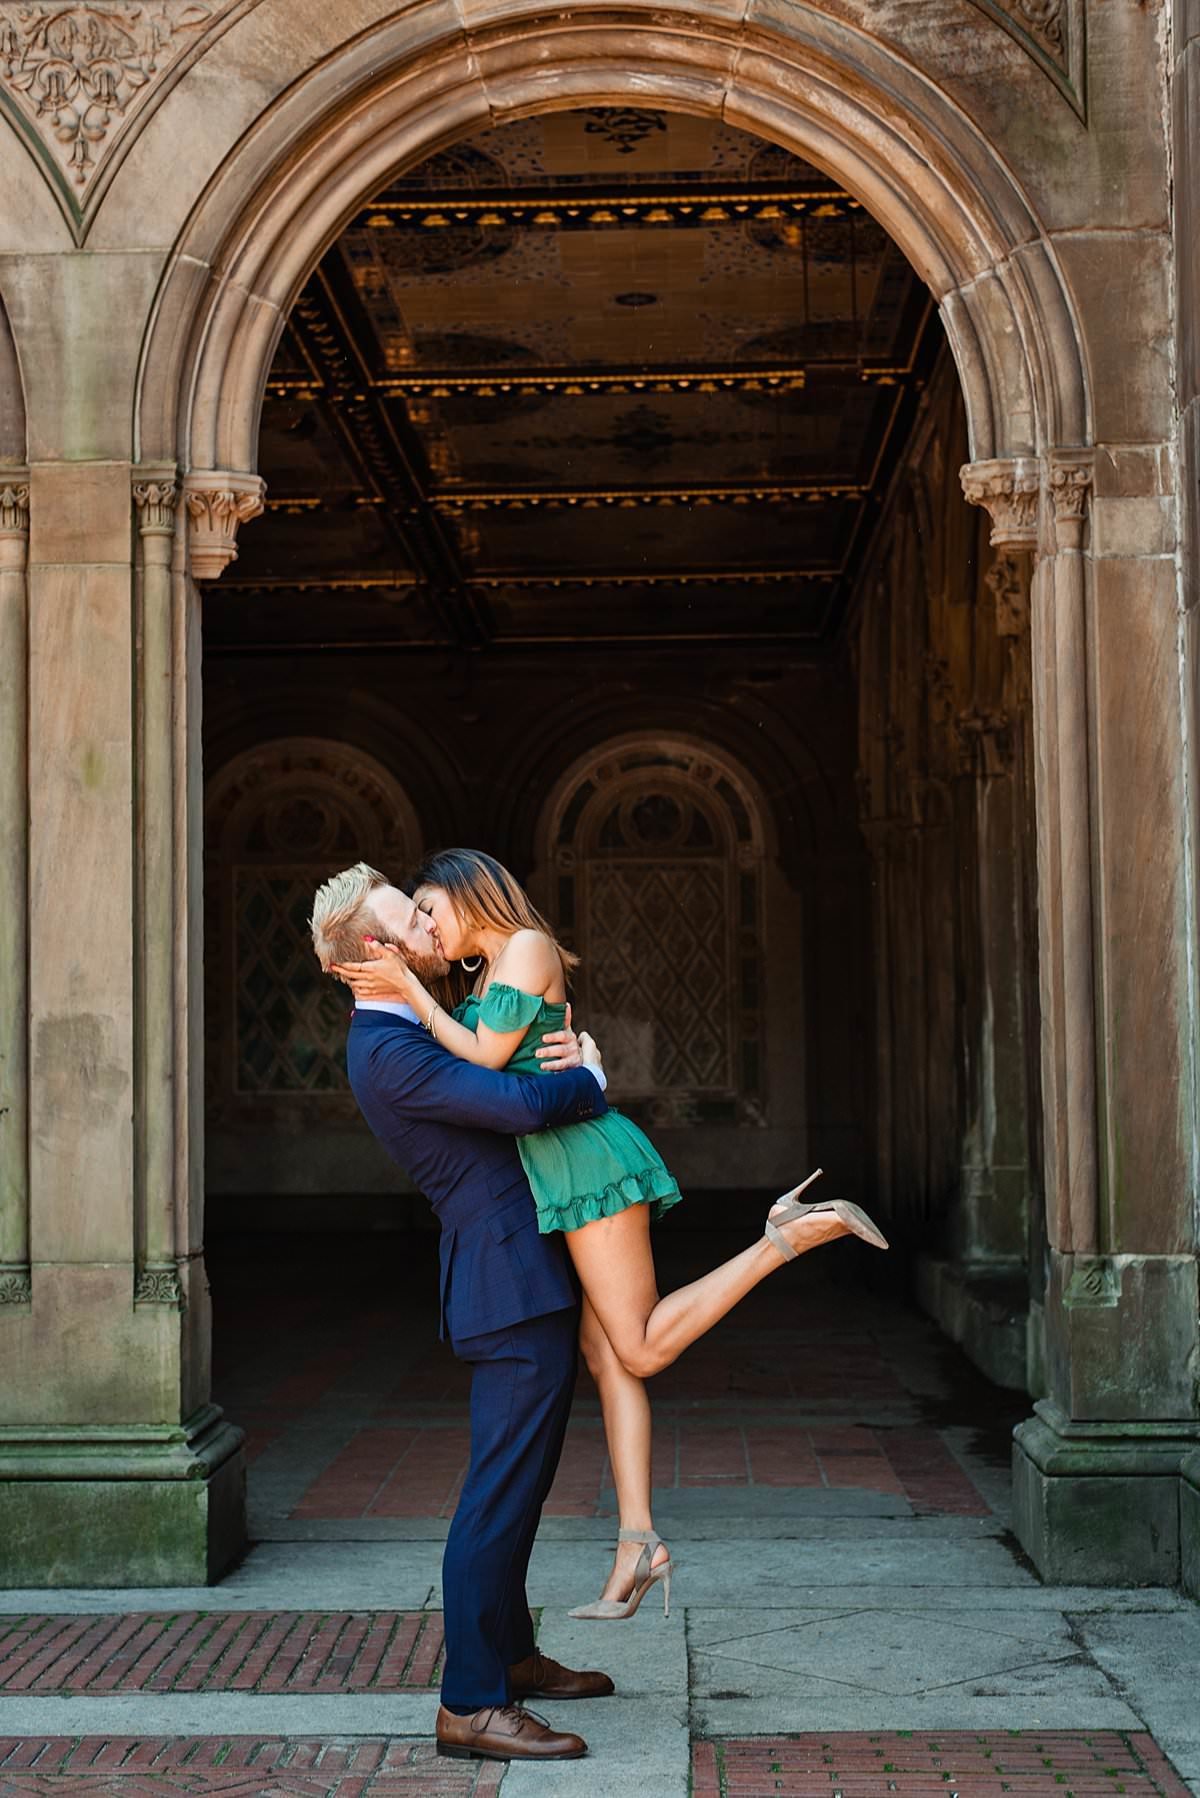 Man lifting his girlfriend for a heel popping kiss under iconic Central Park archway in New York, he is in a blue suit and she has on a short green dress